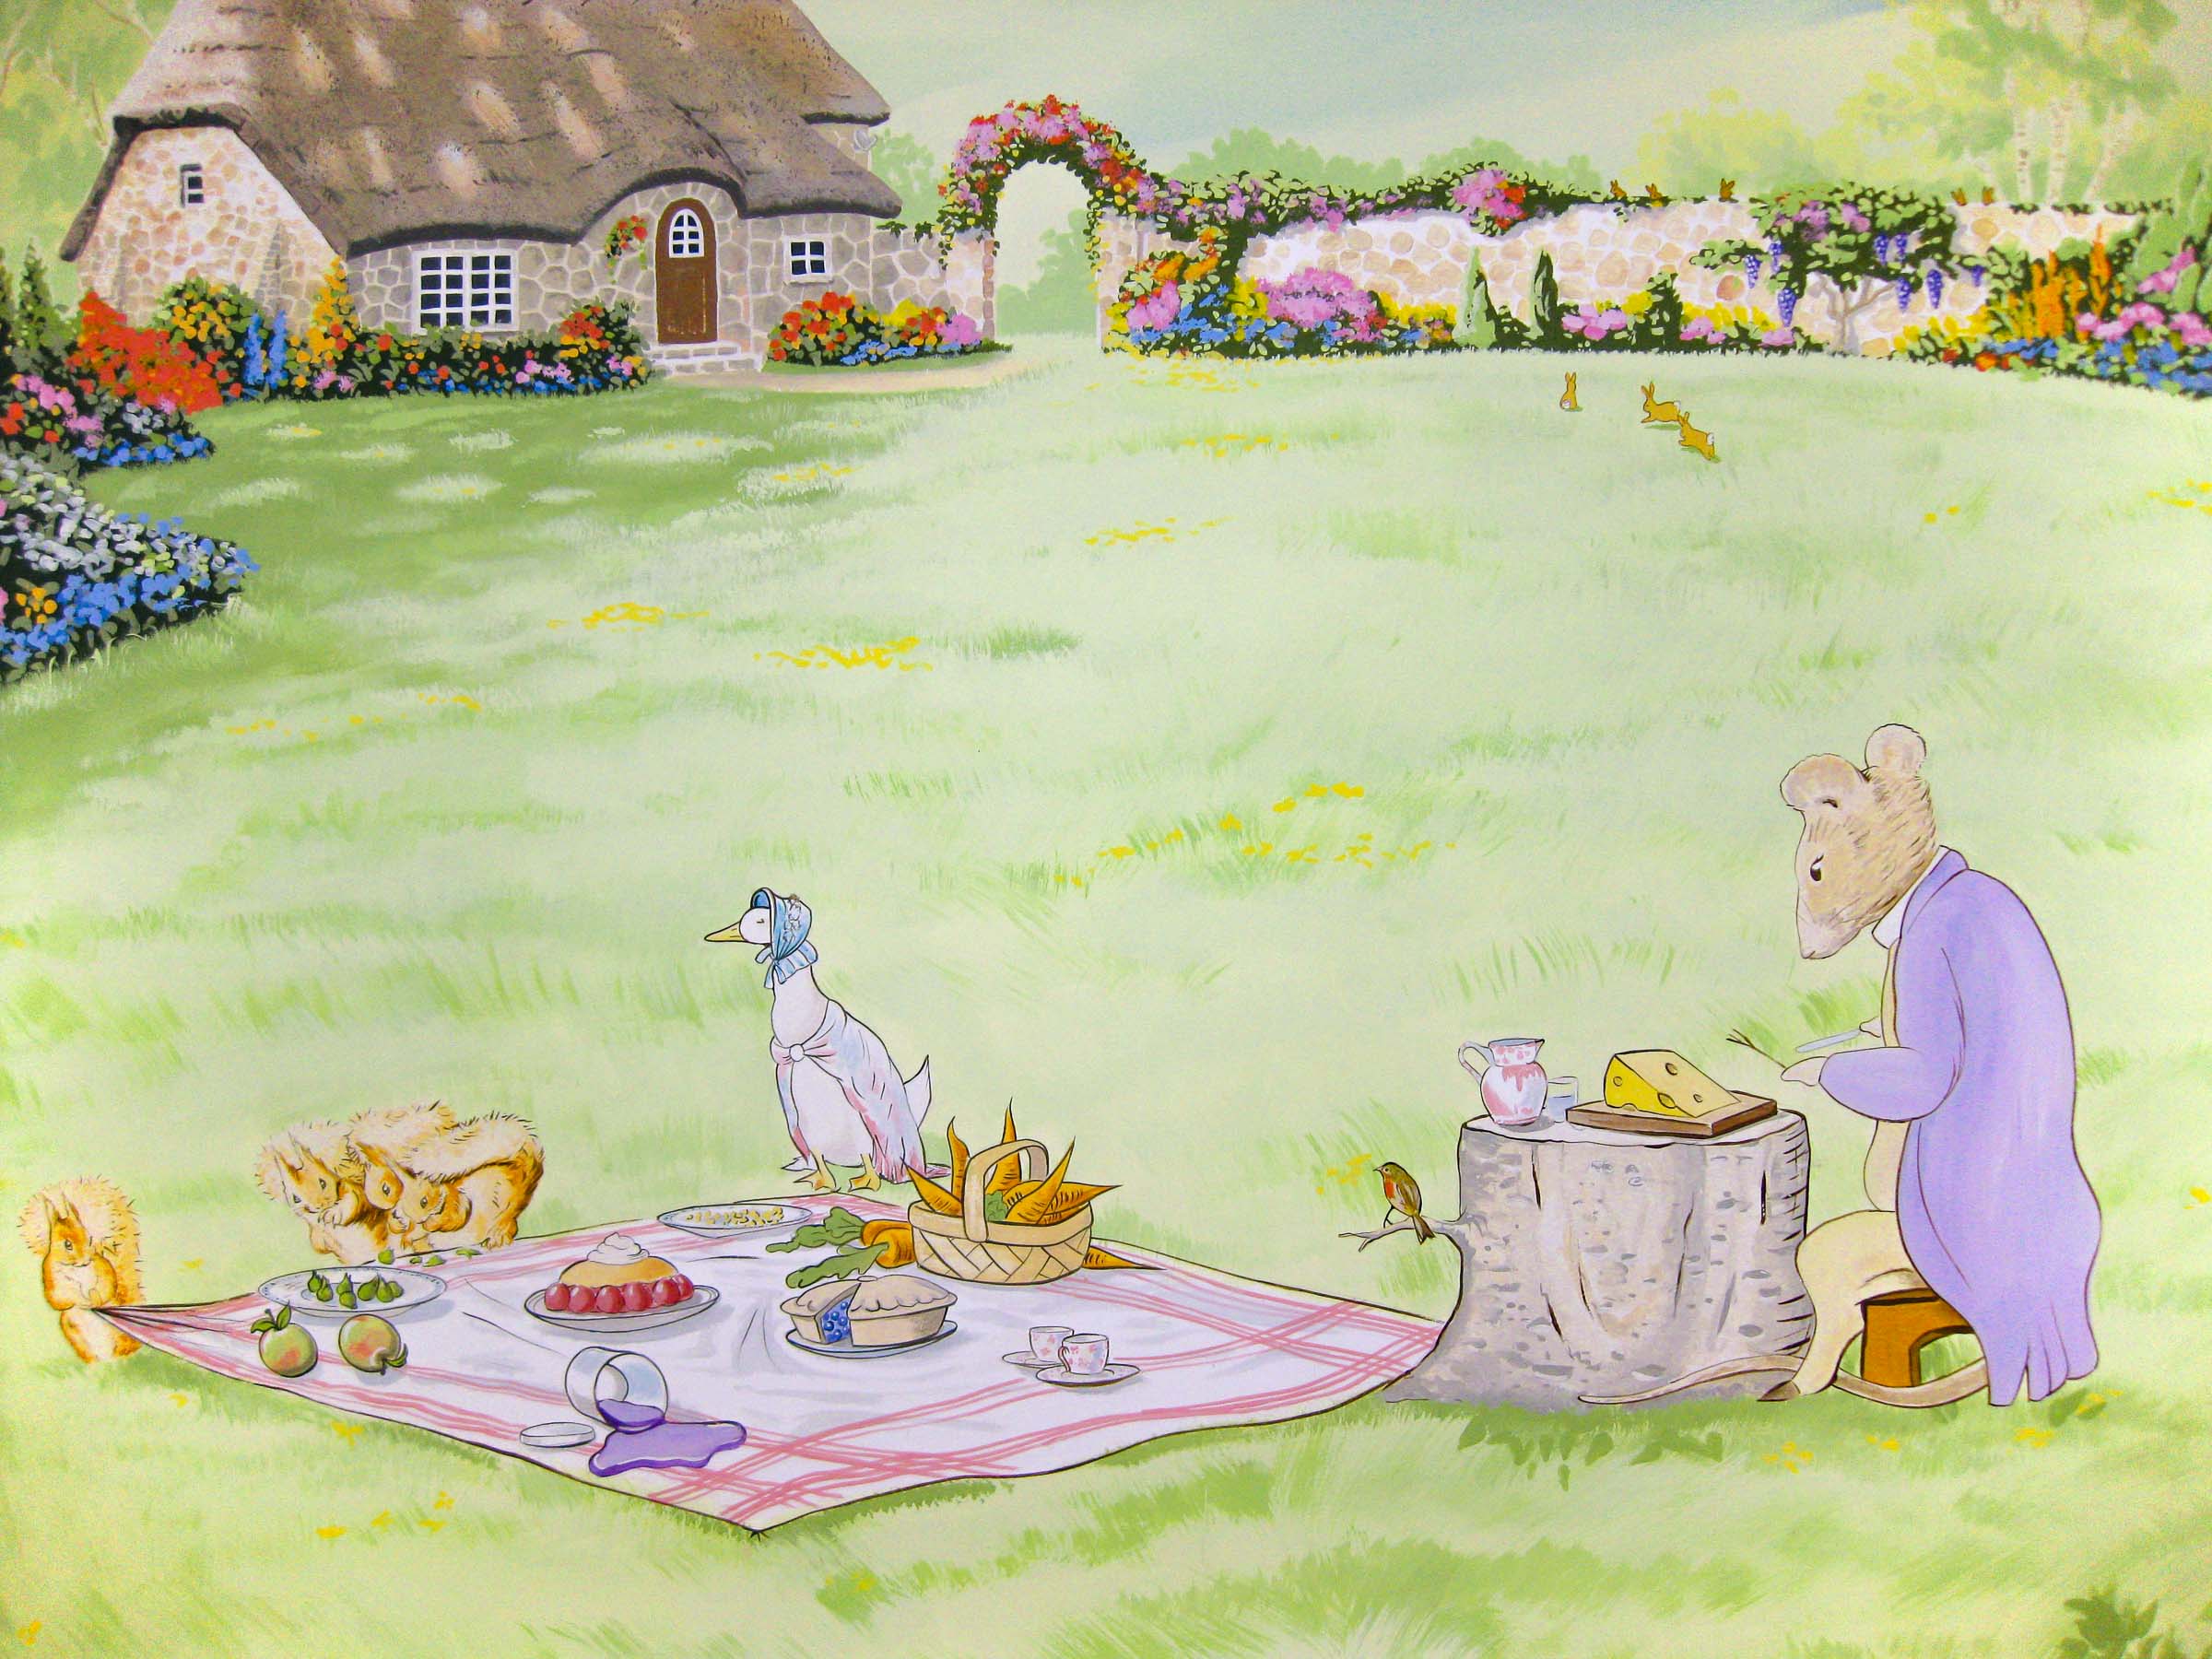 In the style of Beatrix Potter picnic mural